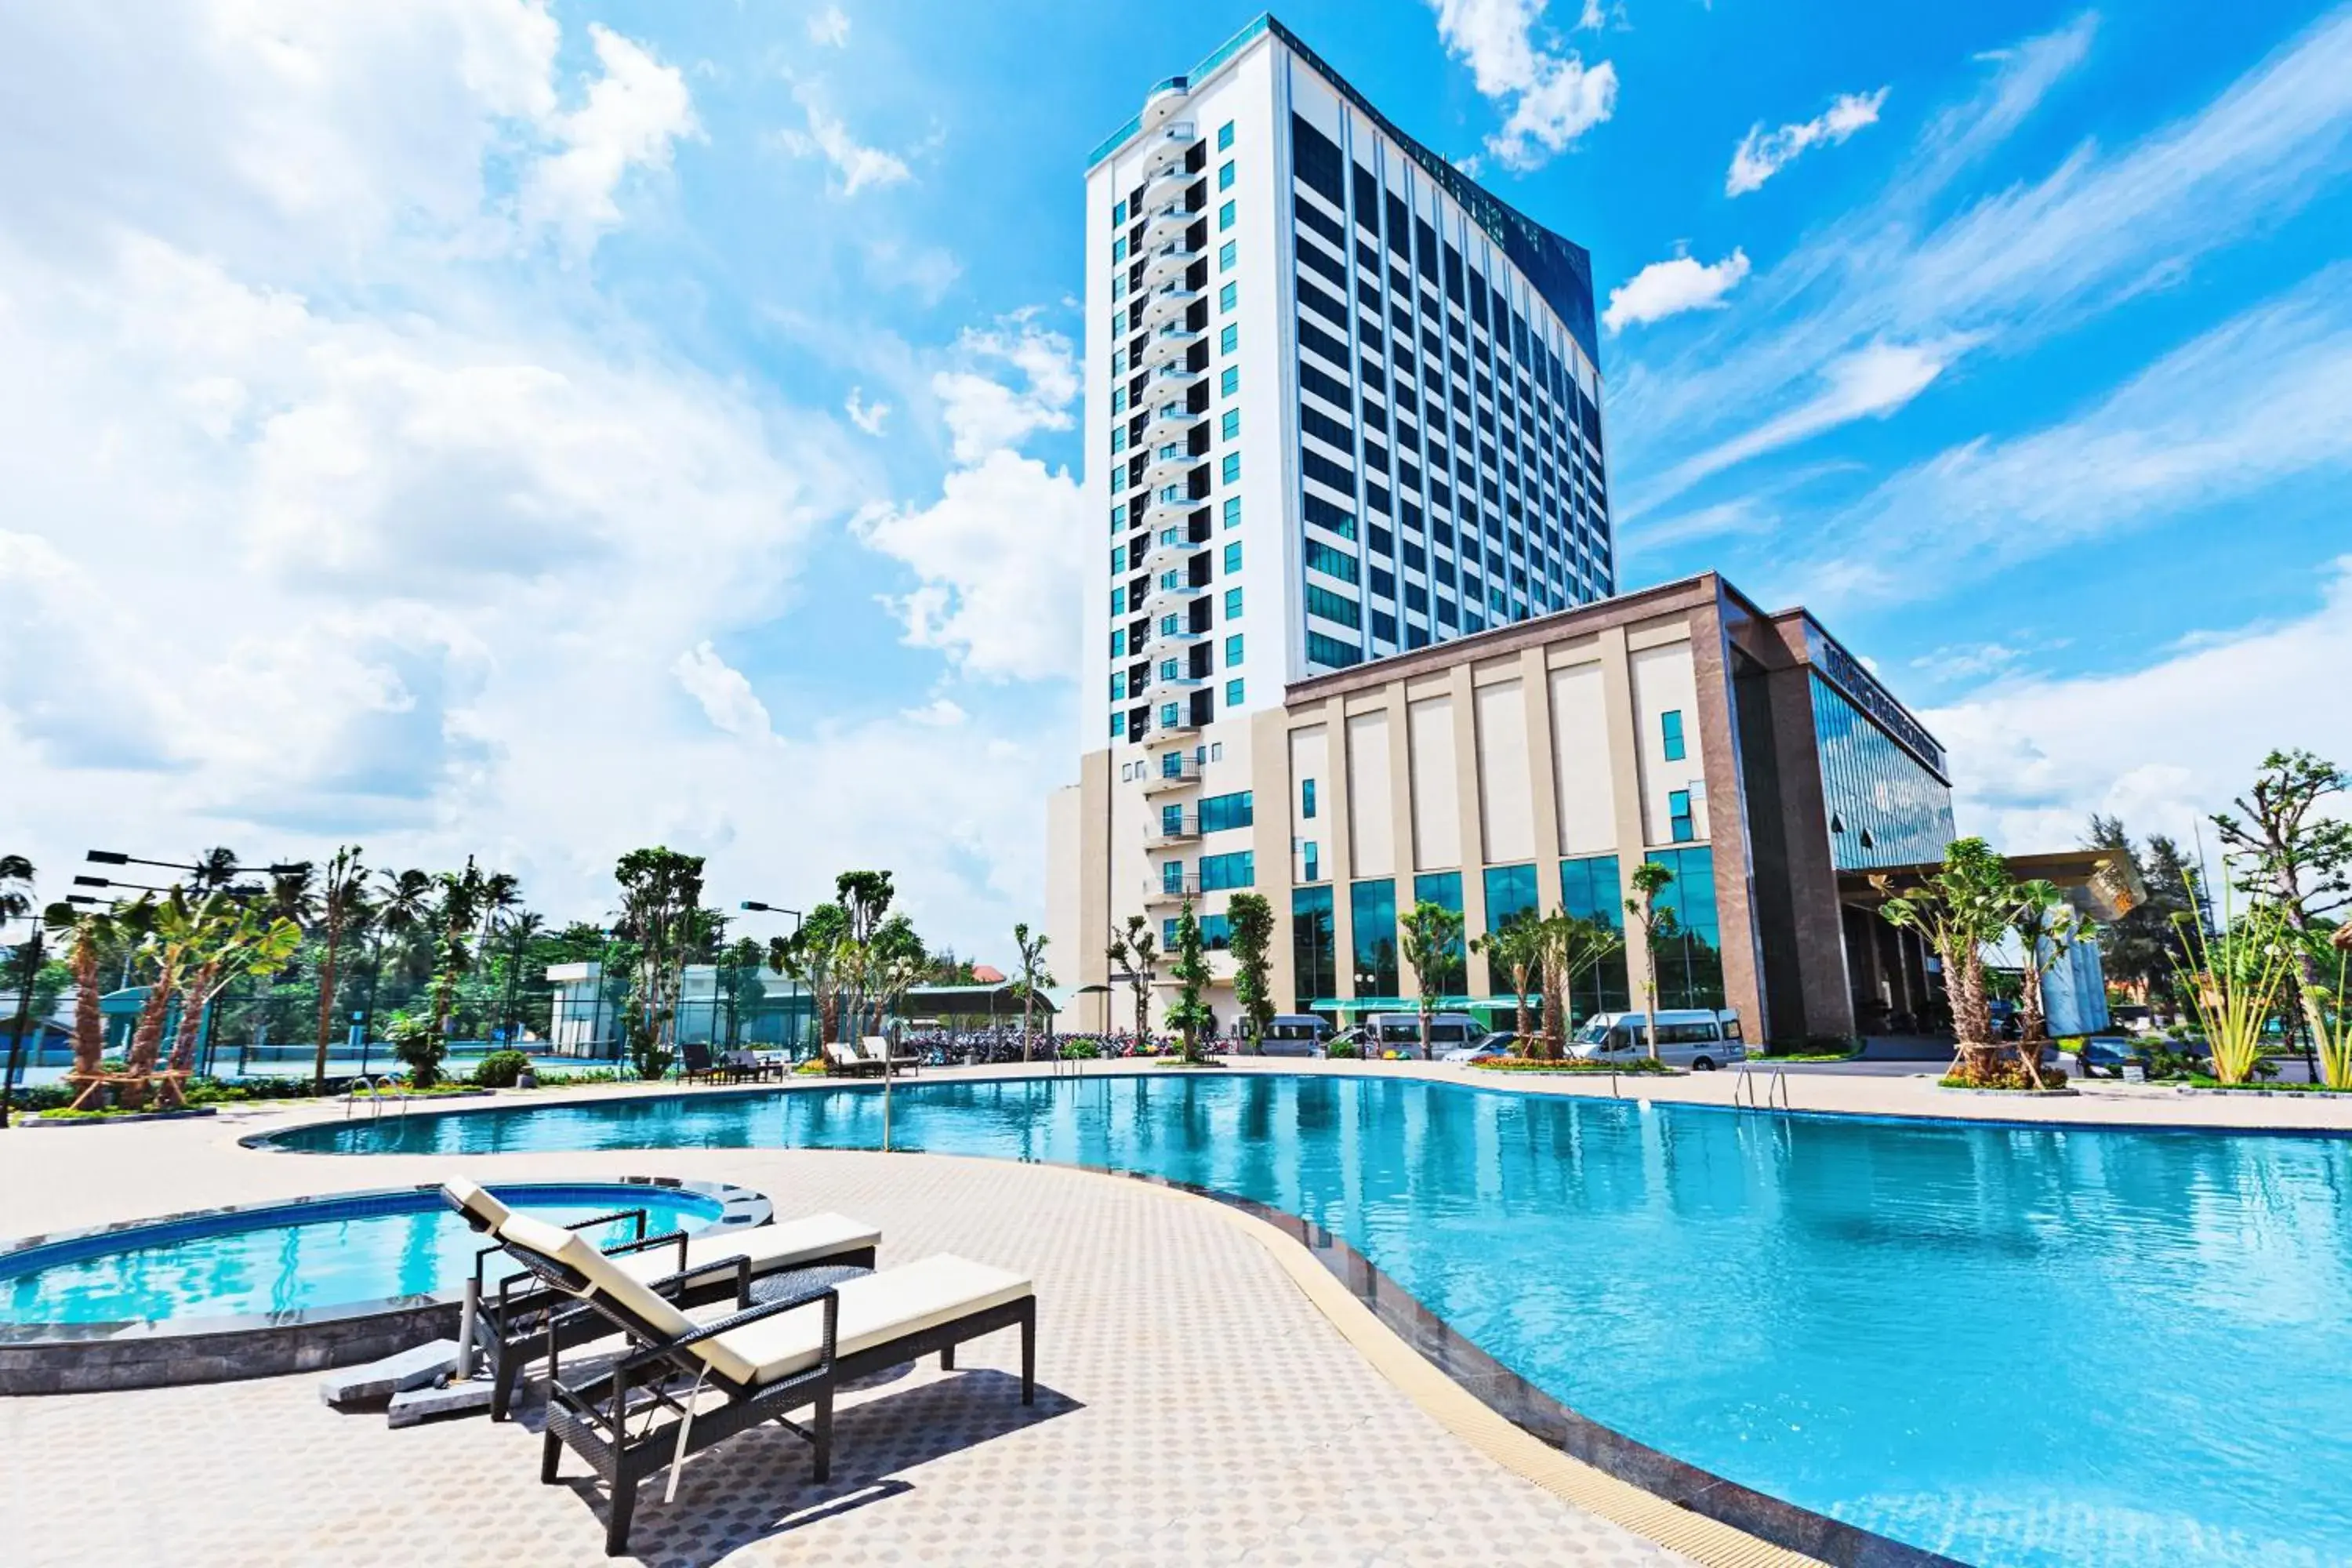 Swimming Pool in Muong Thanh Luxury Can Tho Hotel